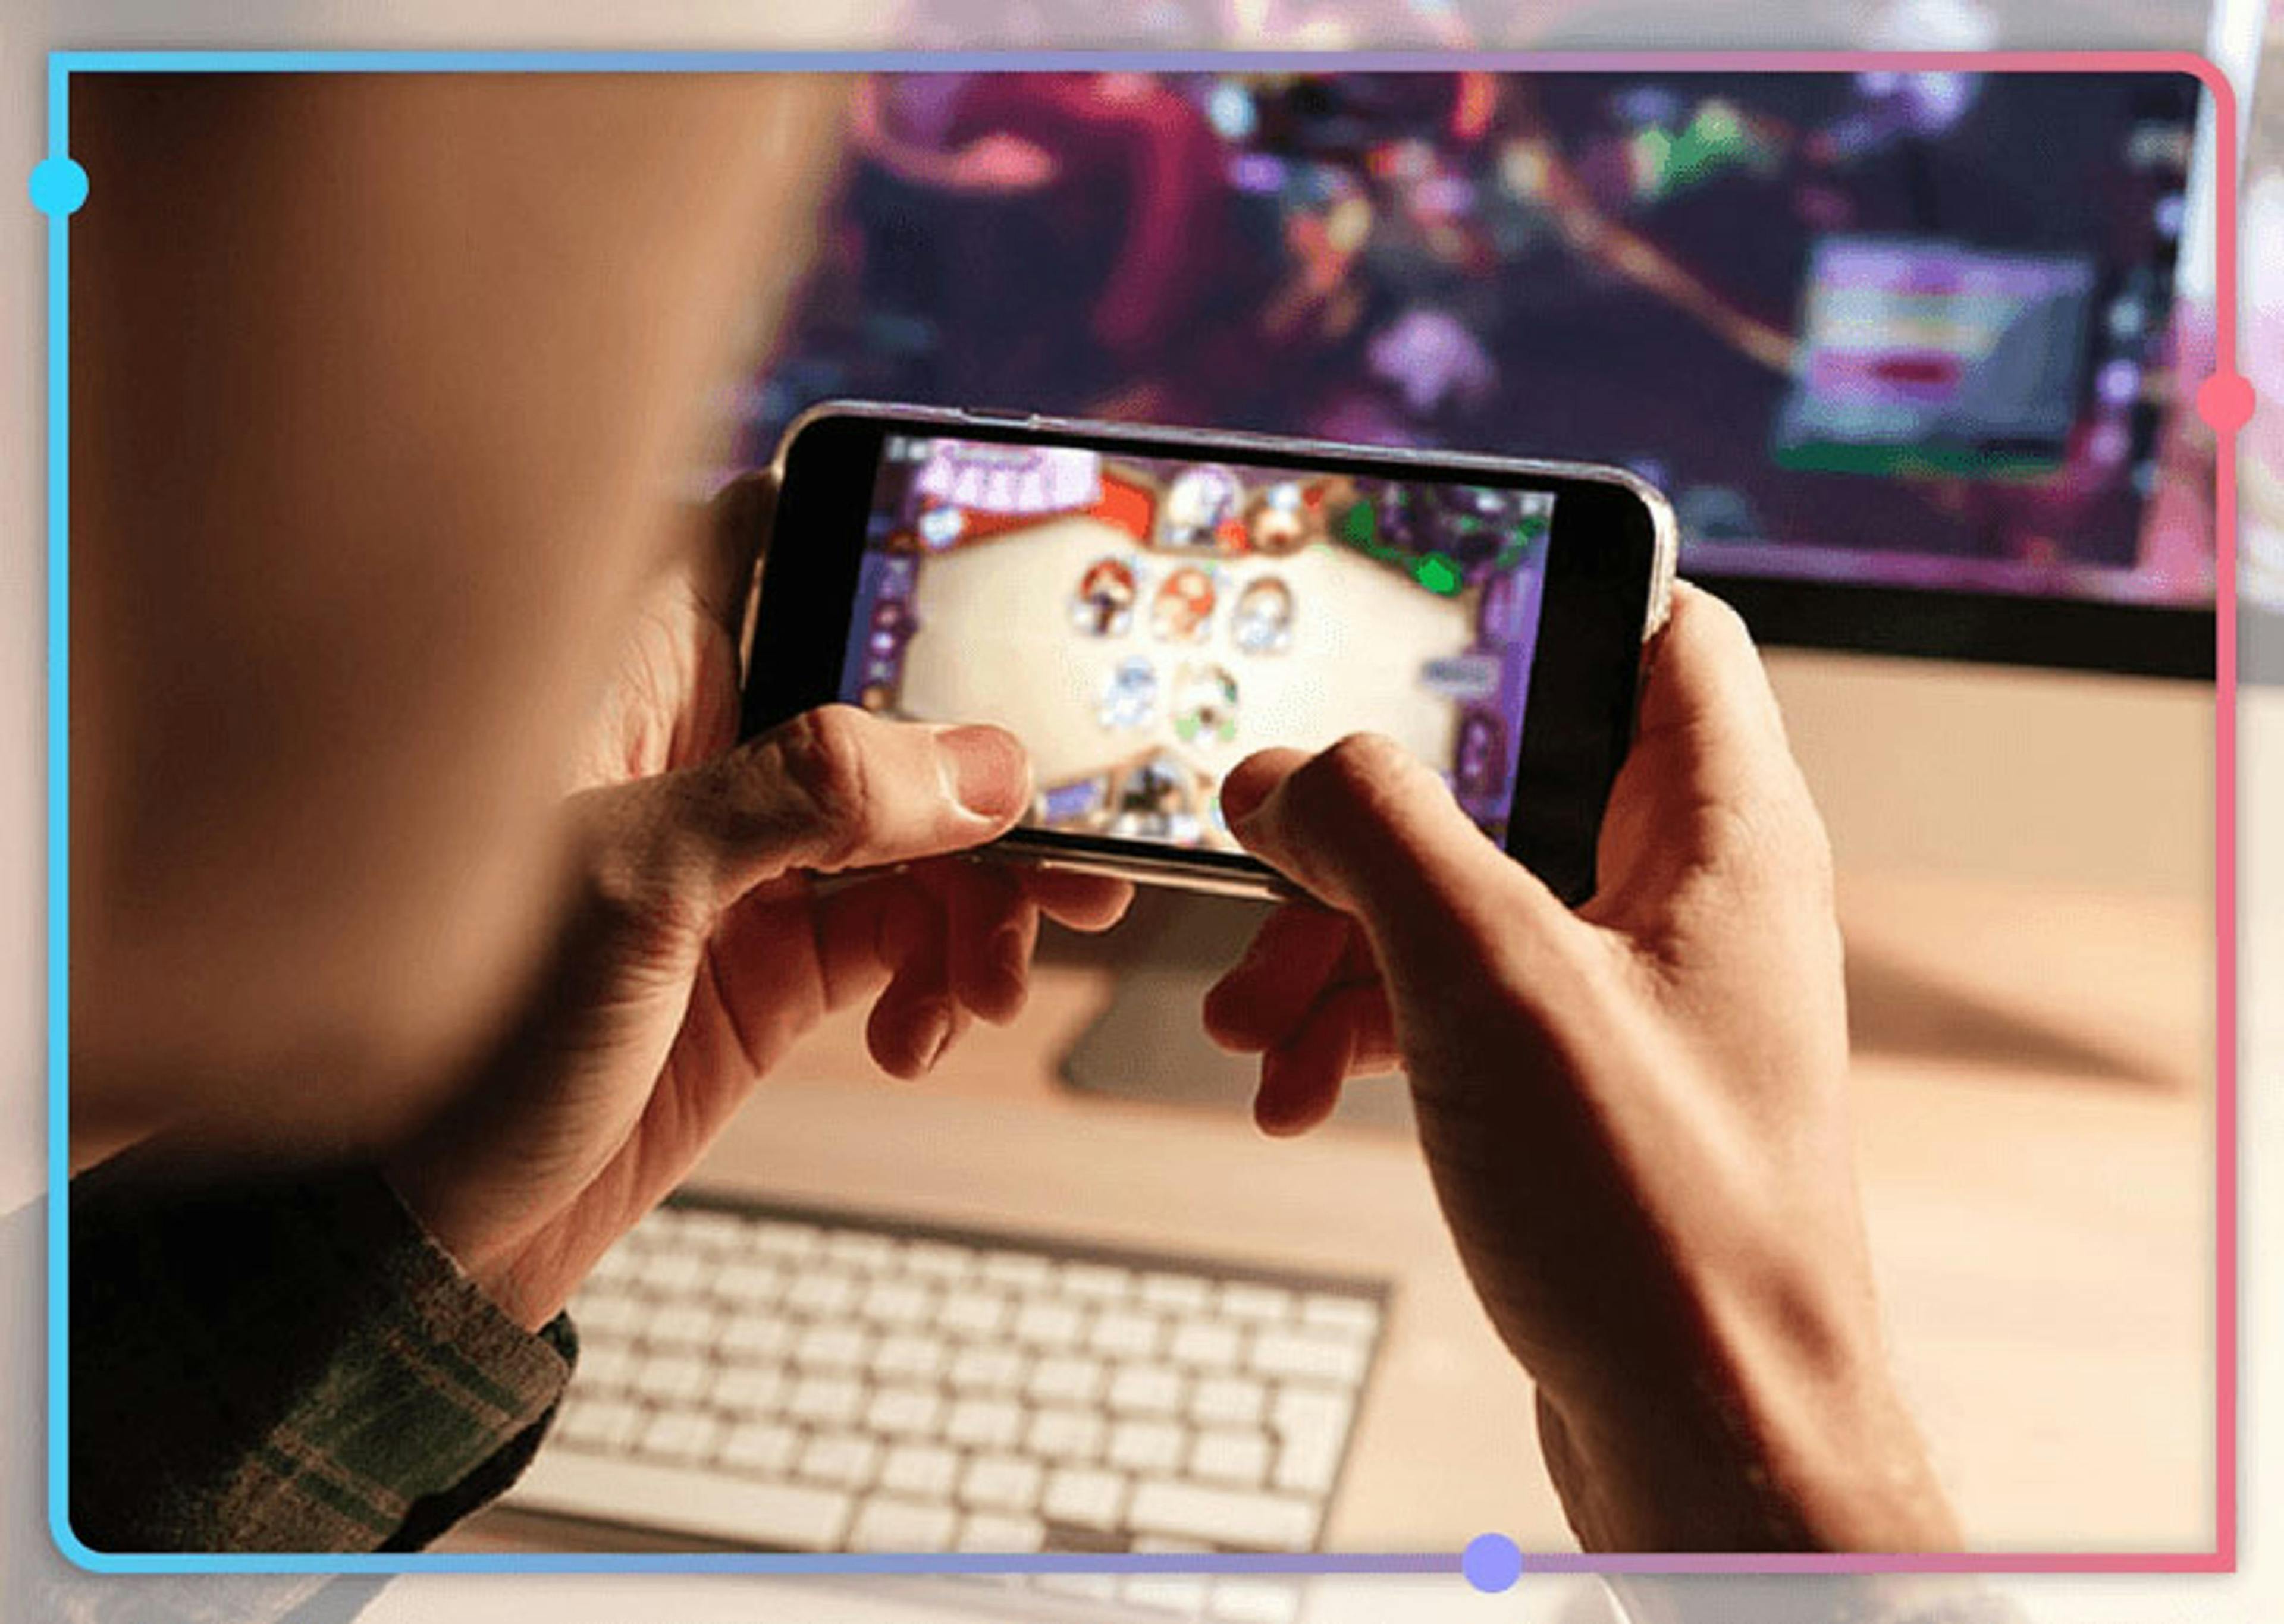 Mobile Gaming Company Increases Acquisition and Monetization